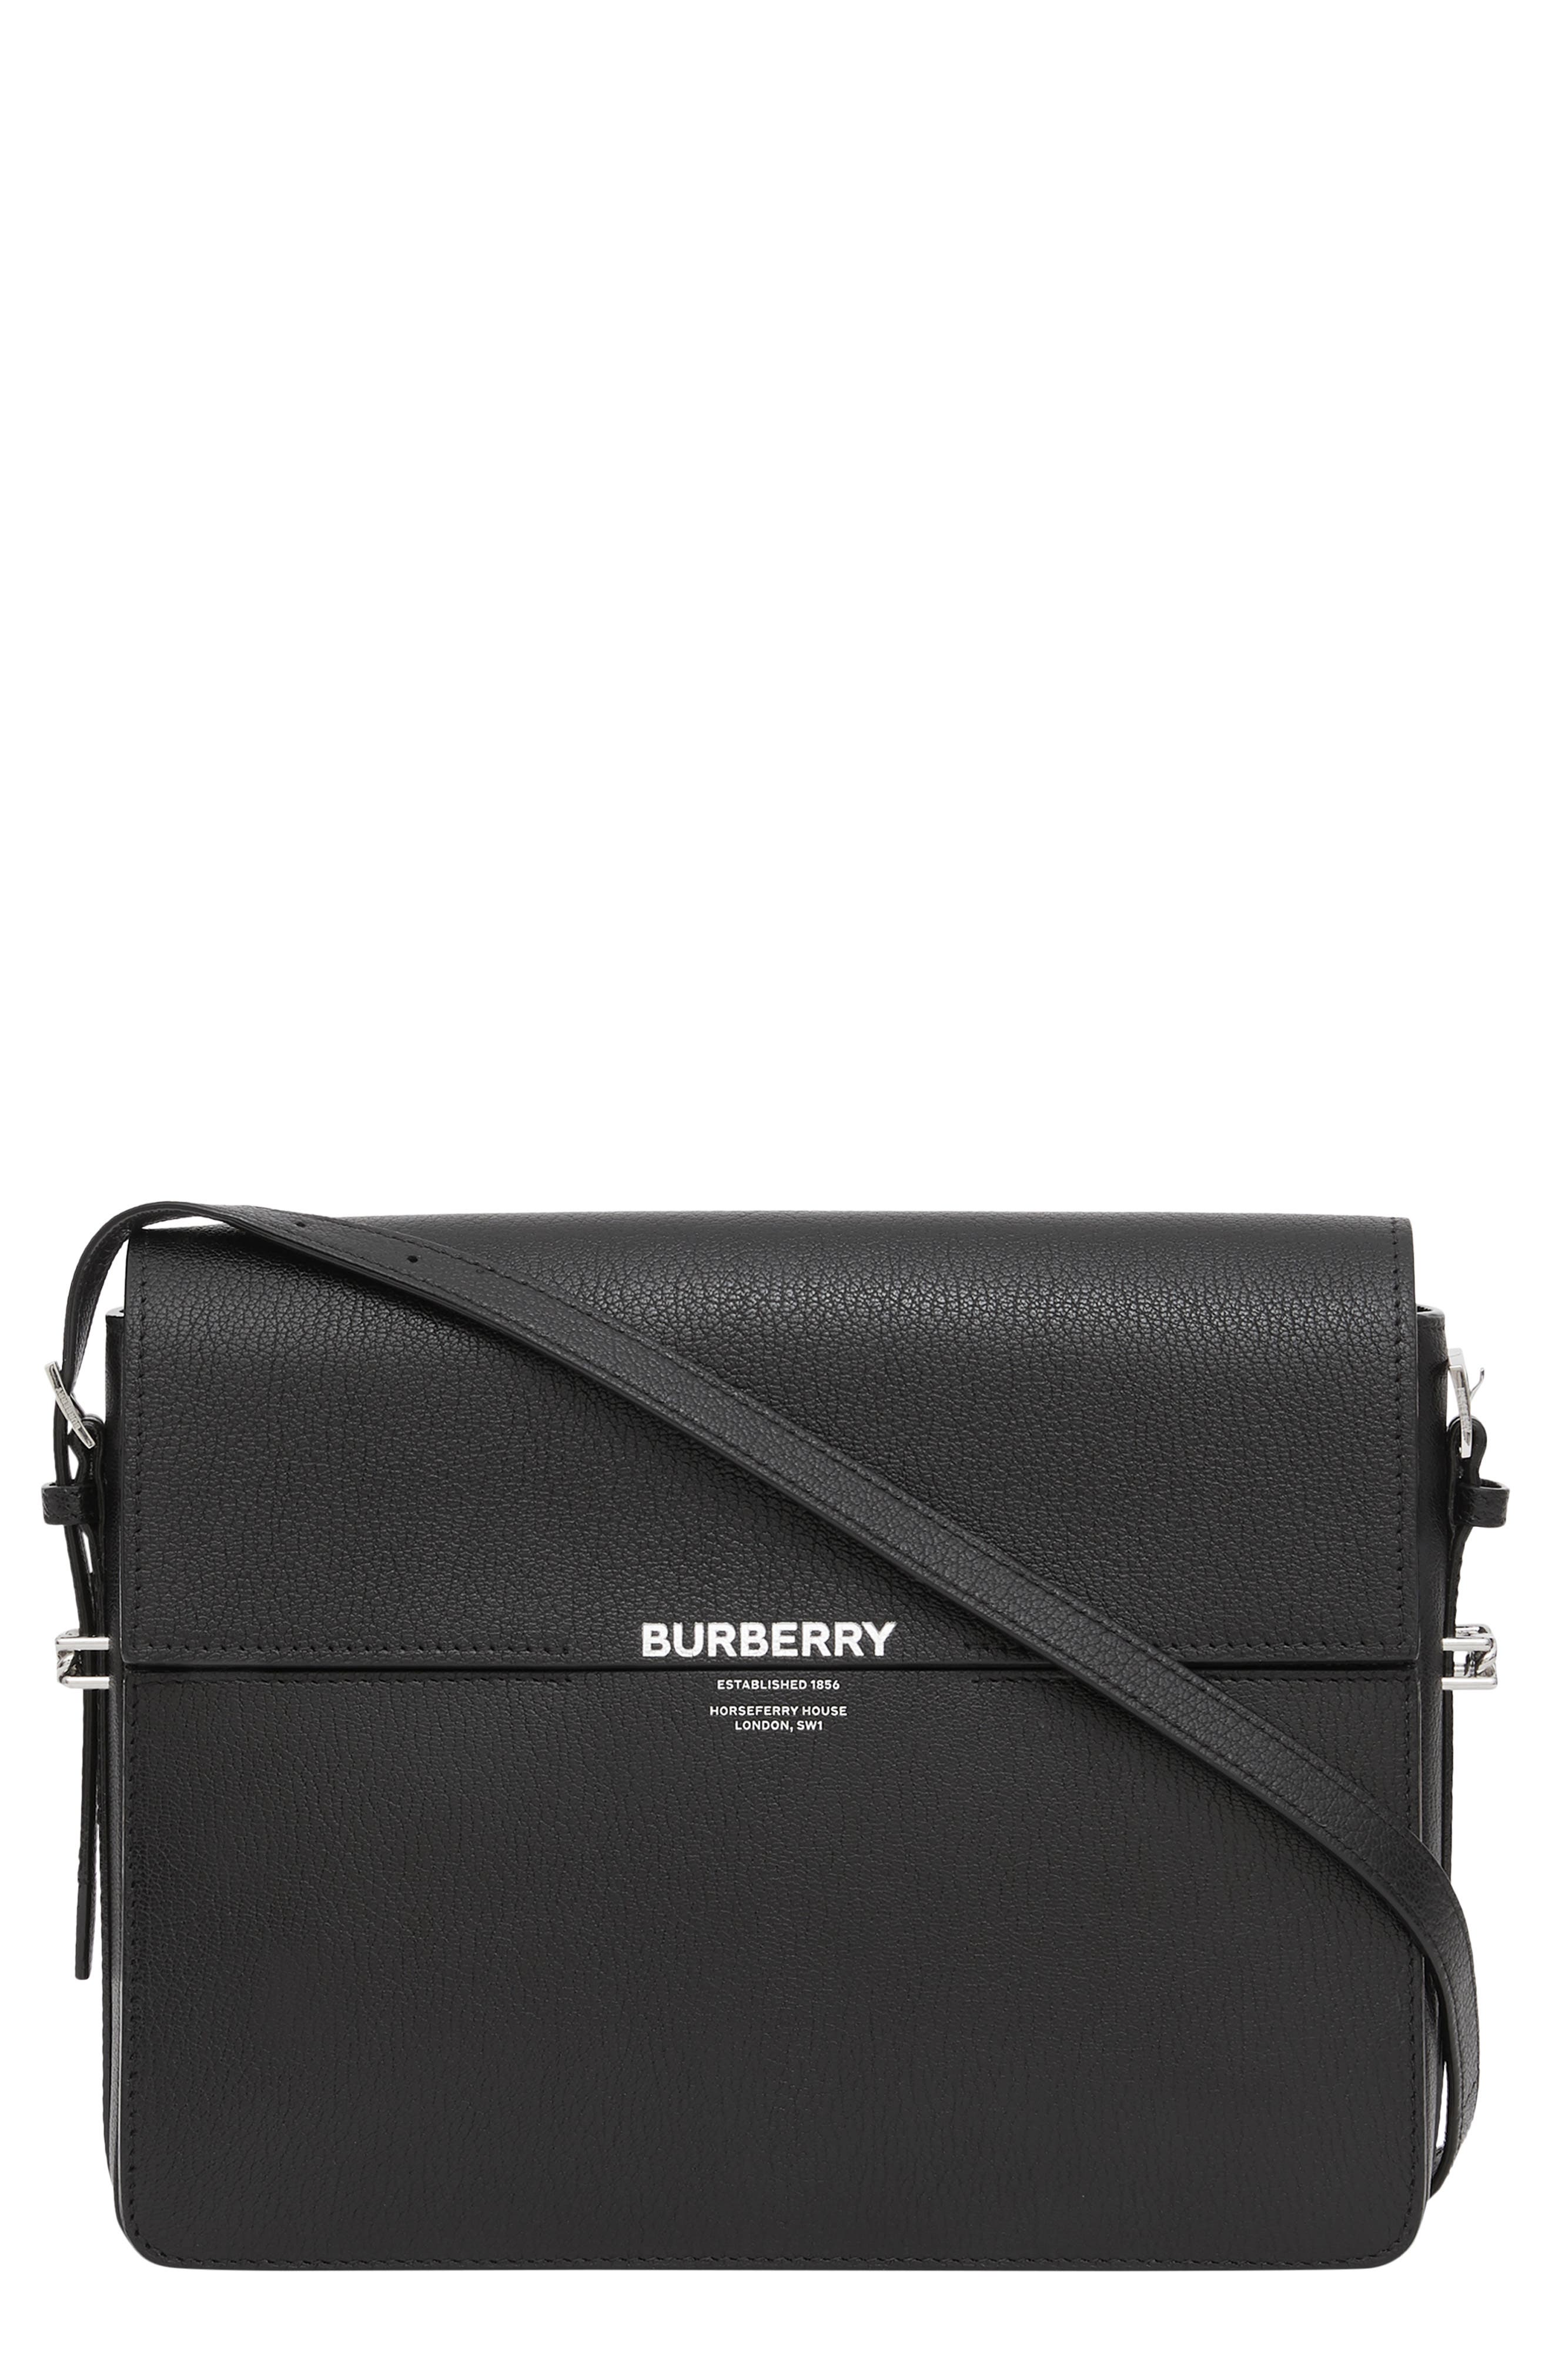 burberry d ring bag review